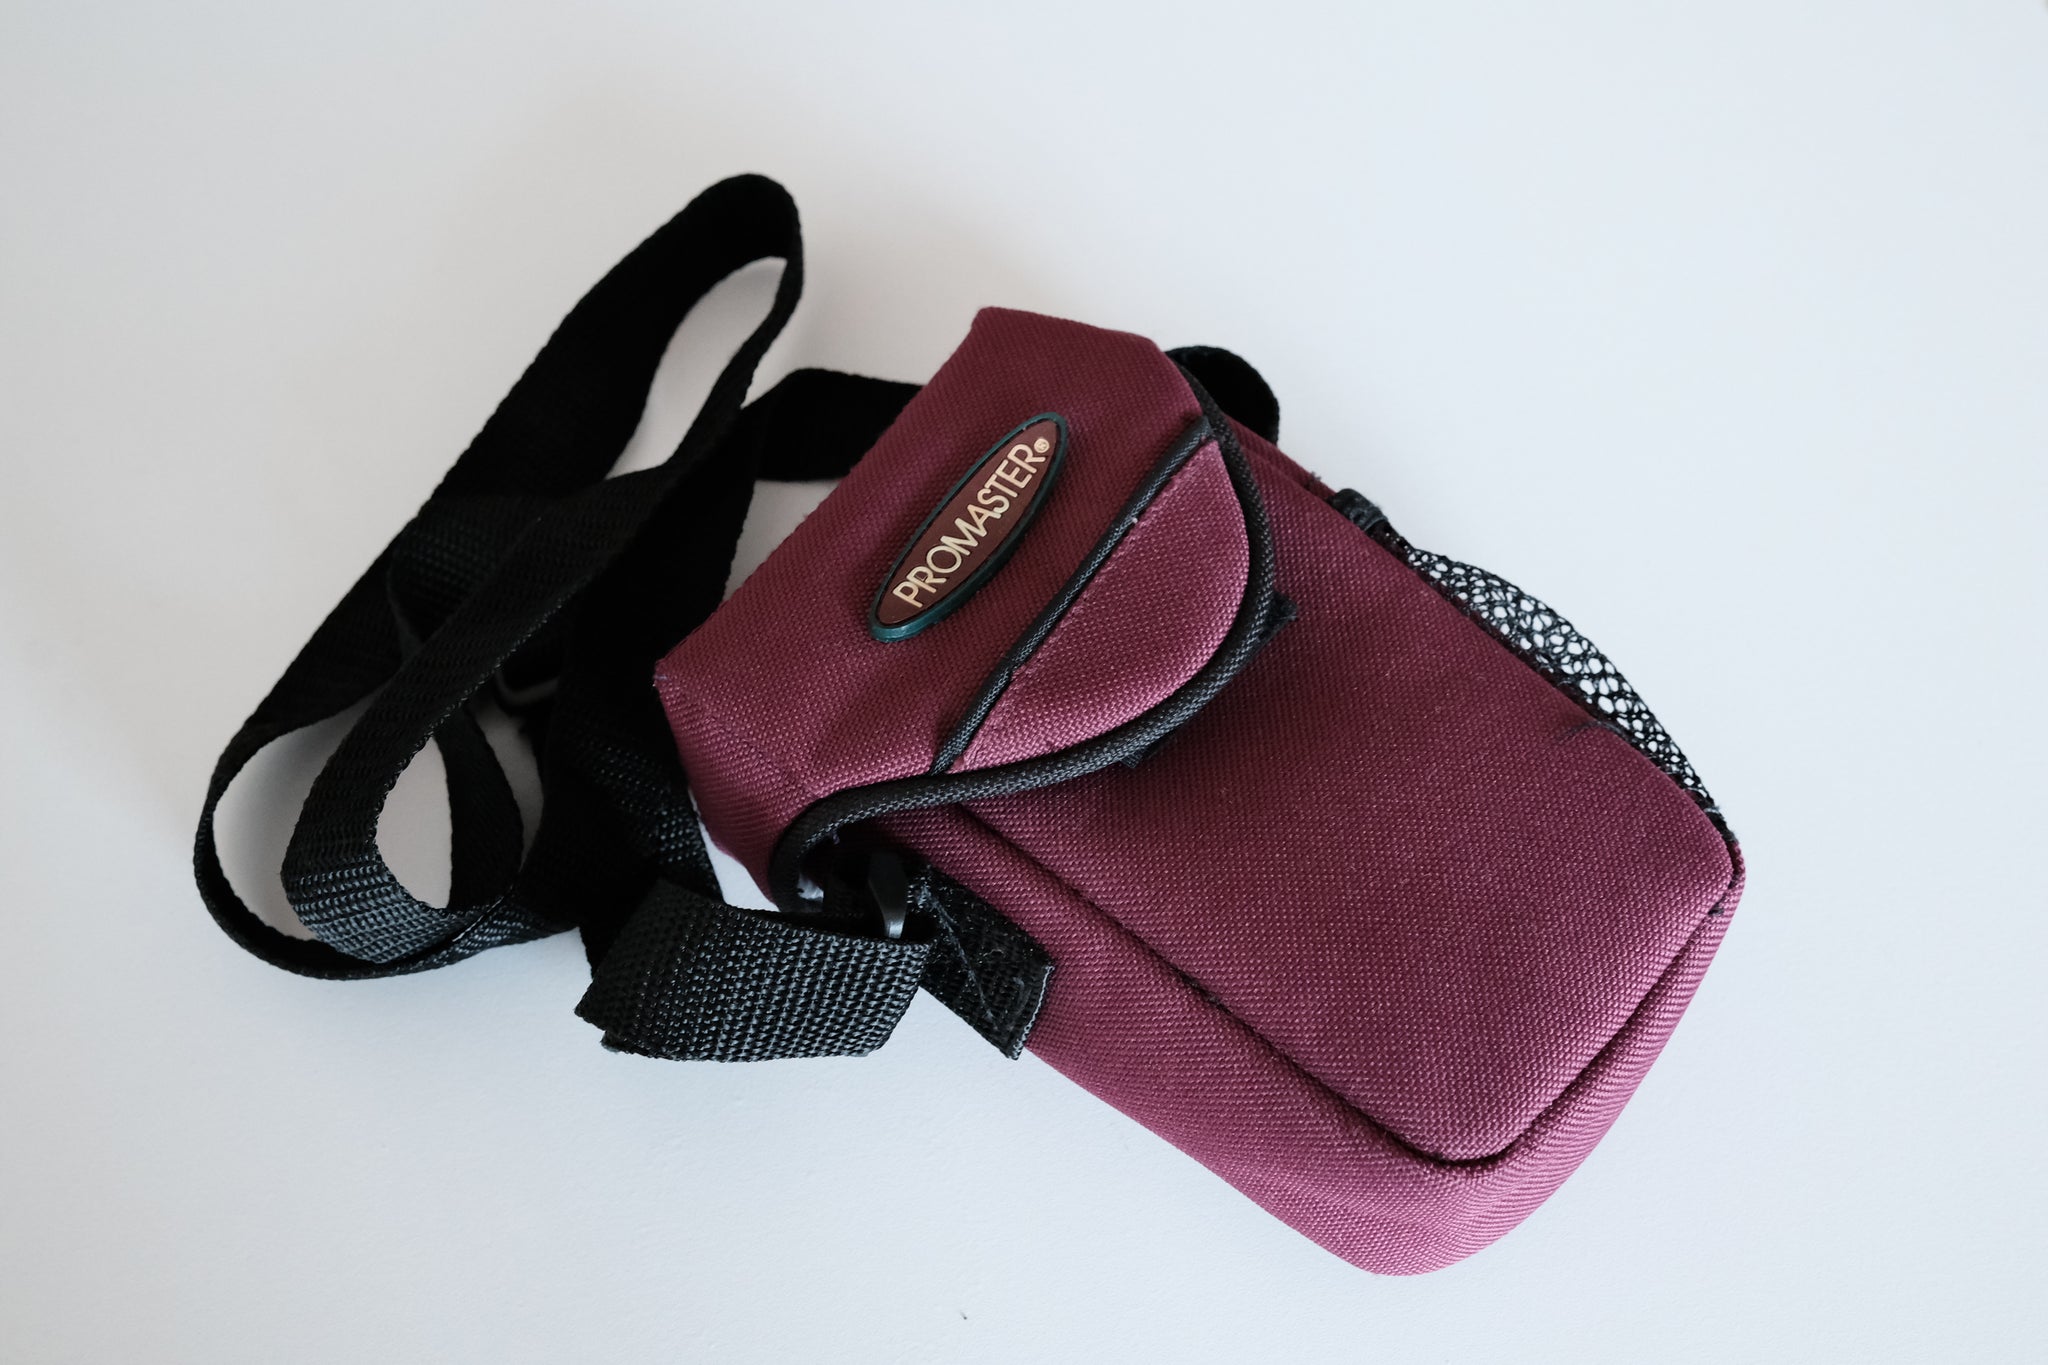 Bag - Retro Compact Camera Carry Pouch - ProMaster Red